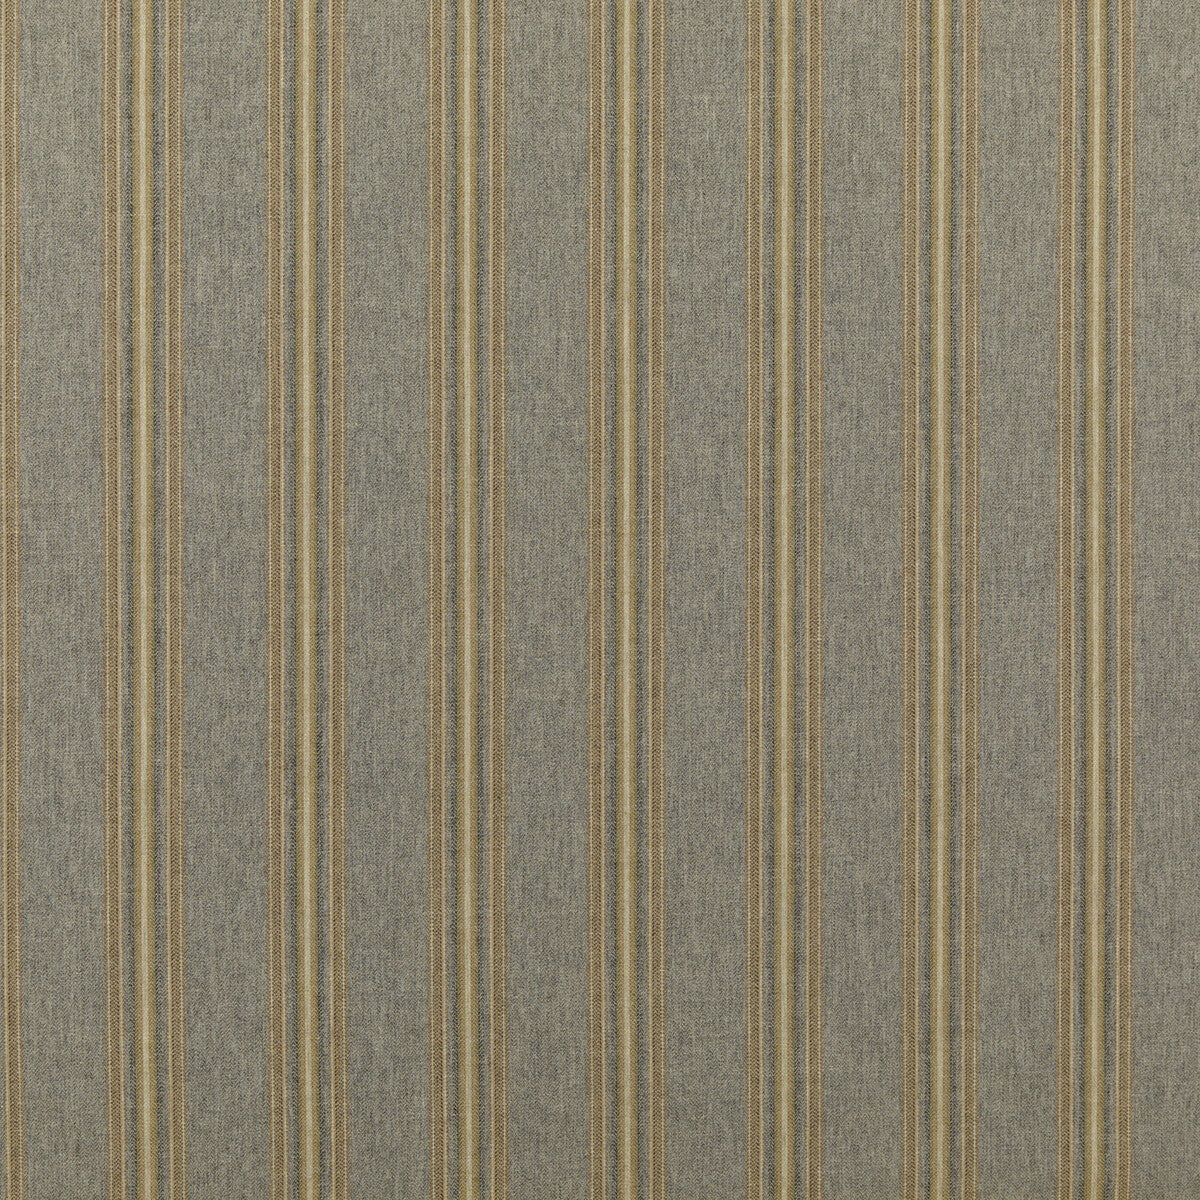 Belmont fabric in woodsmoke color - pattern FD774.A15.0 - by Mulberry in the Modern Country collection